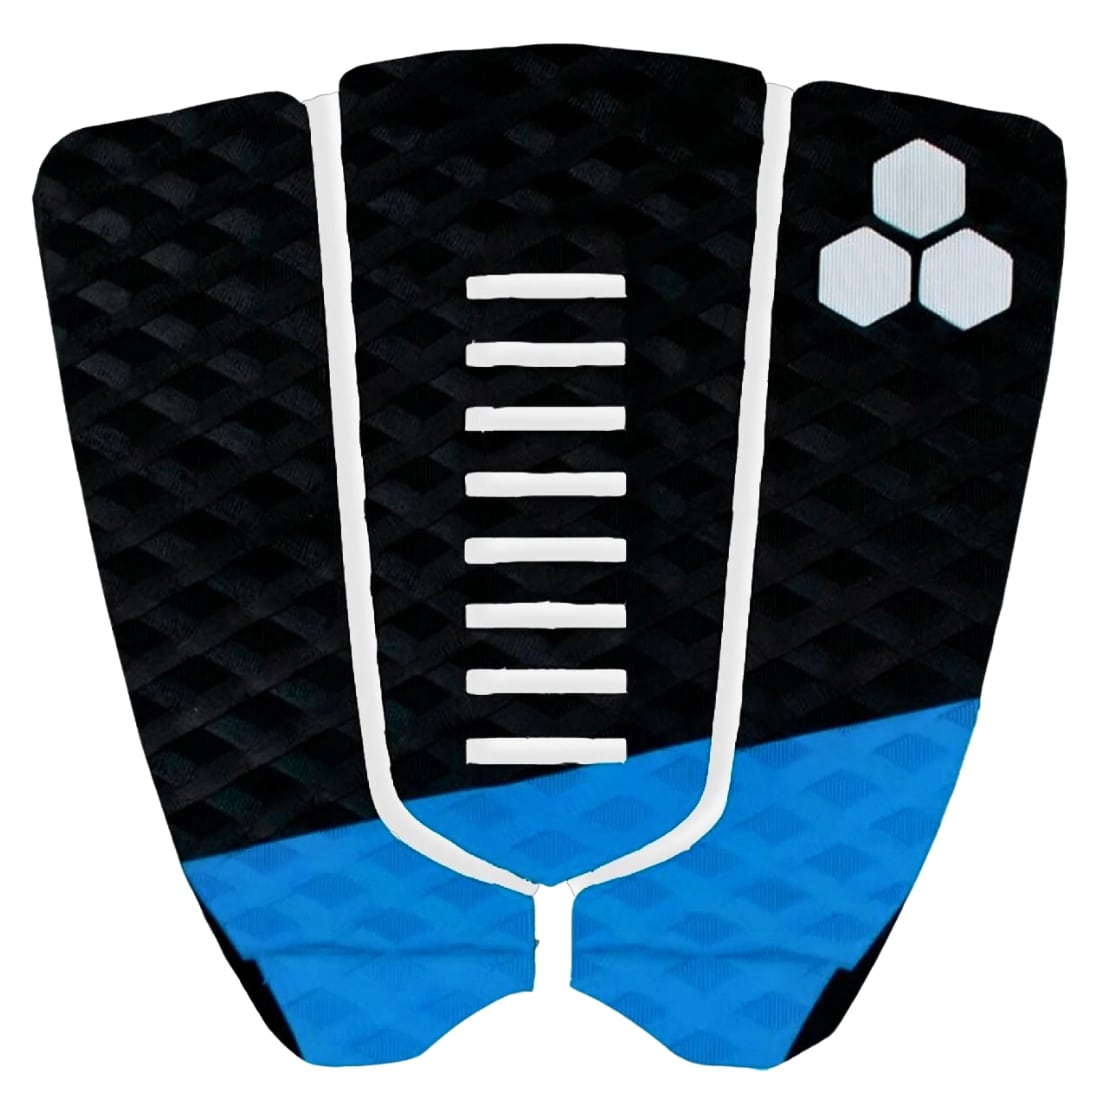 Channel Islands Mixed Groove 3 Piece Tail Pad - Black/Blue - 3 Piece Tail Pad by Channel Islands